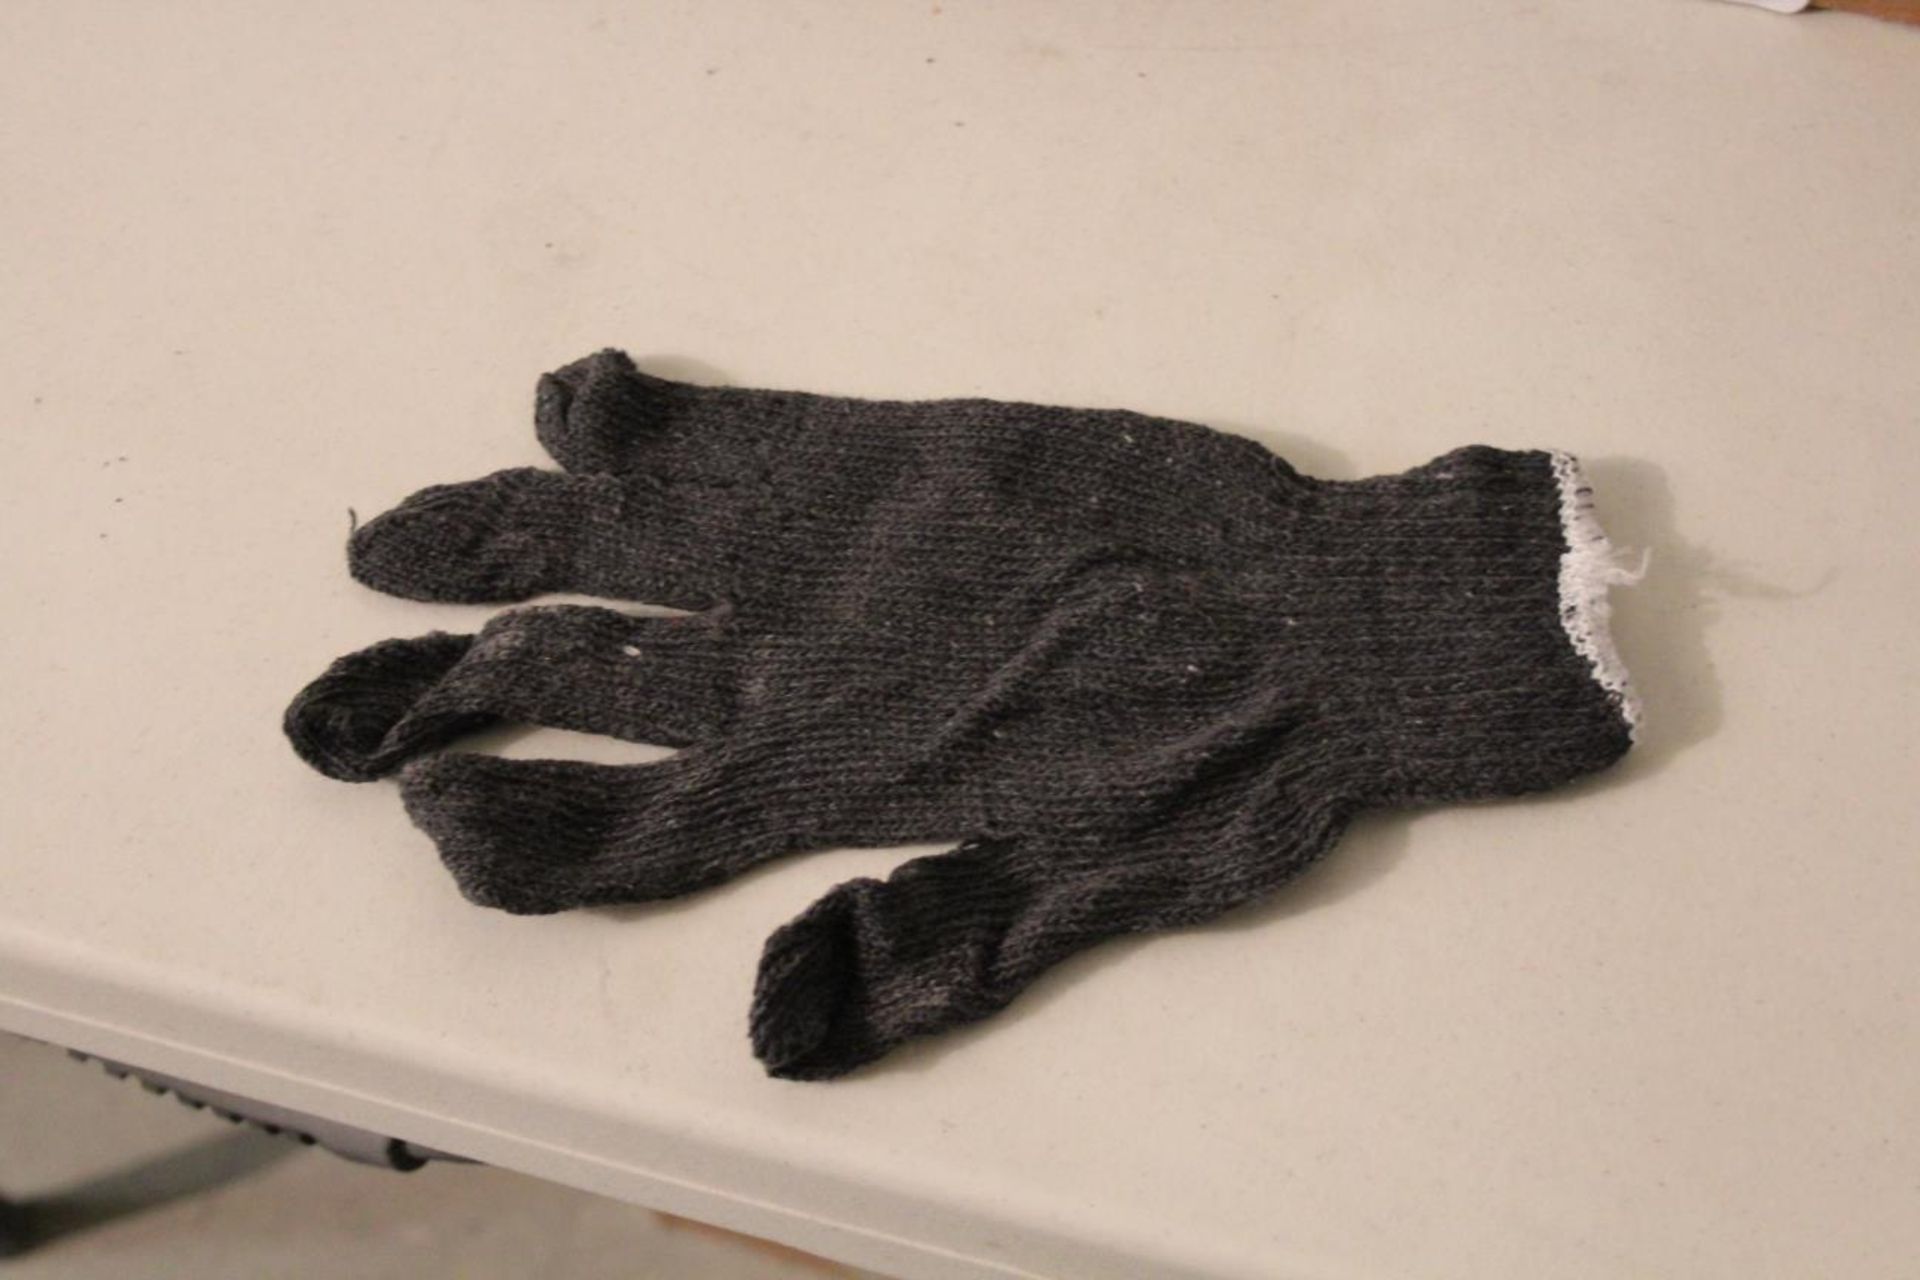 Work Gloves, Cotton - Image 2 of 2